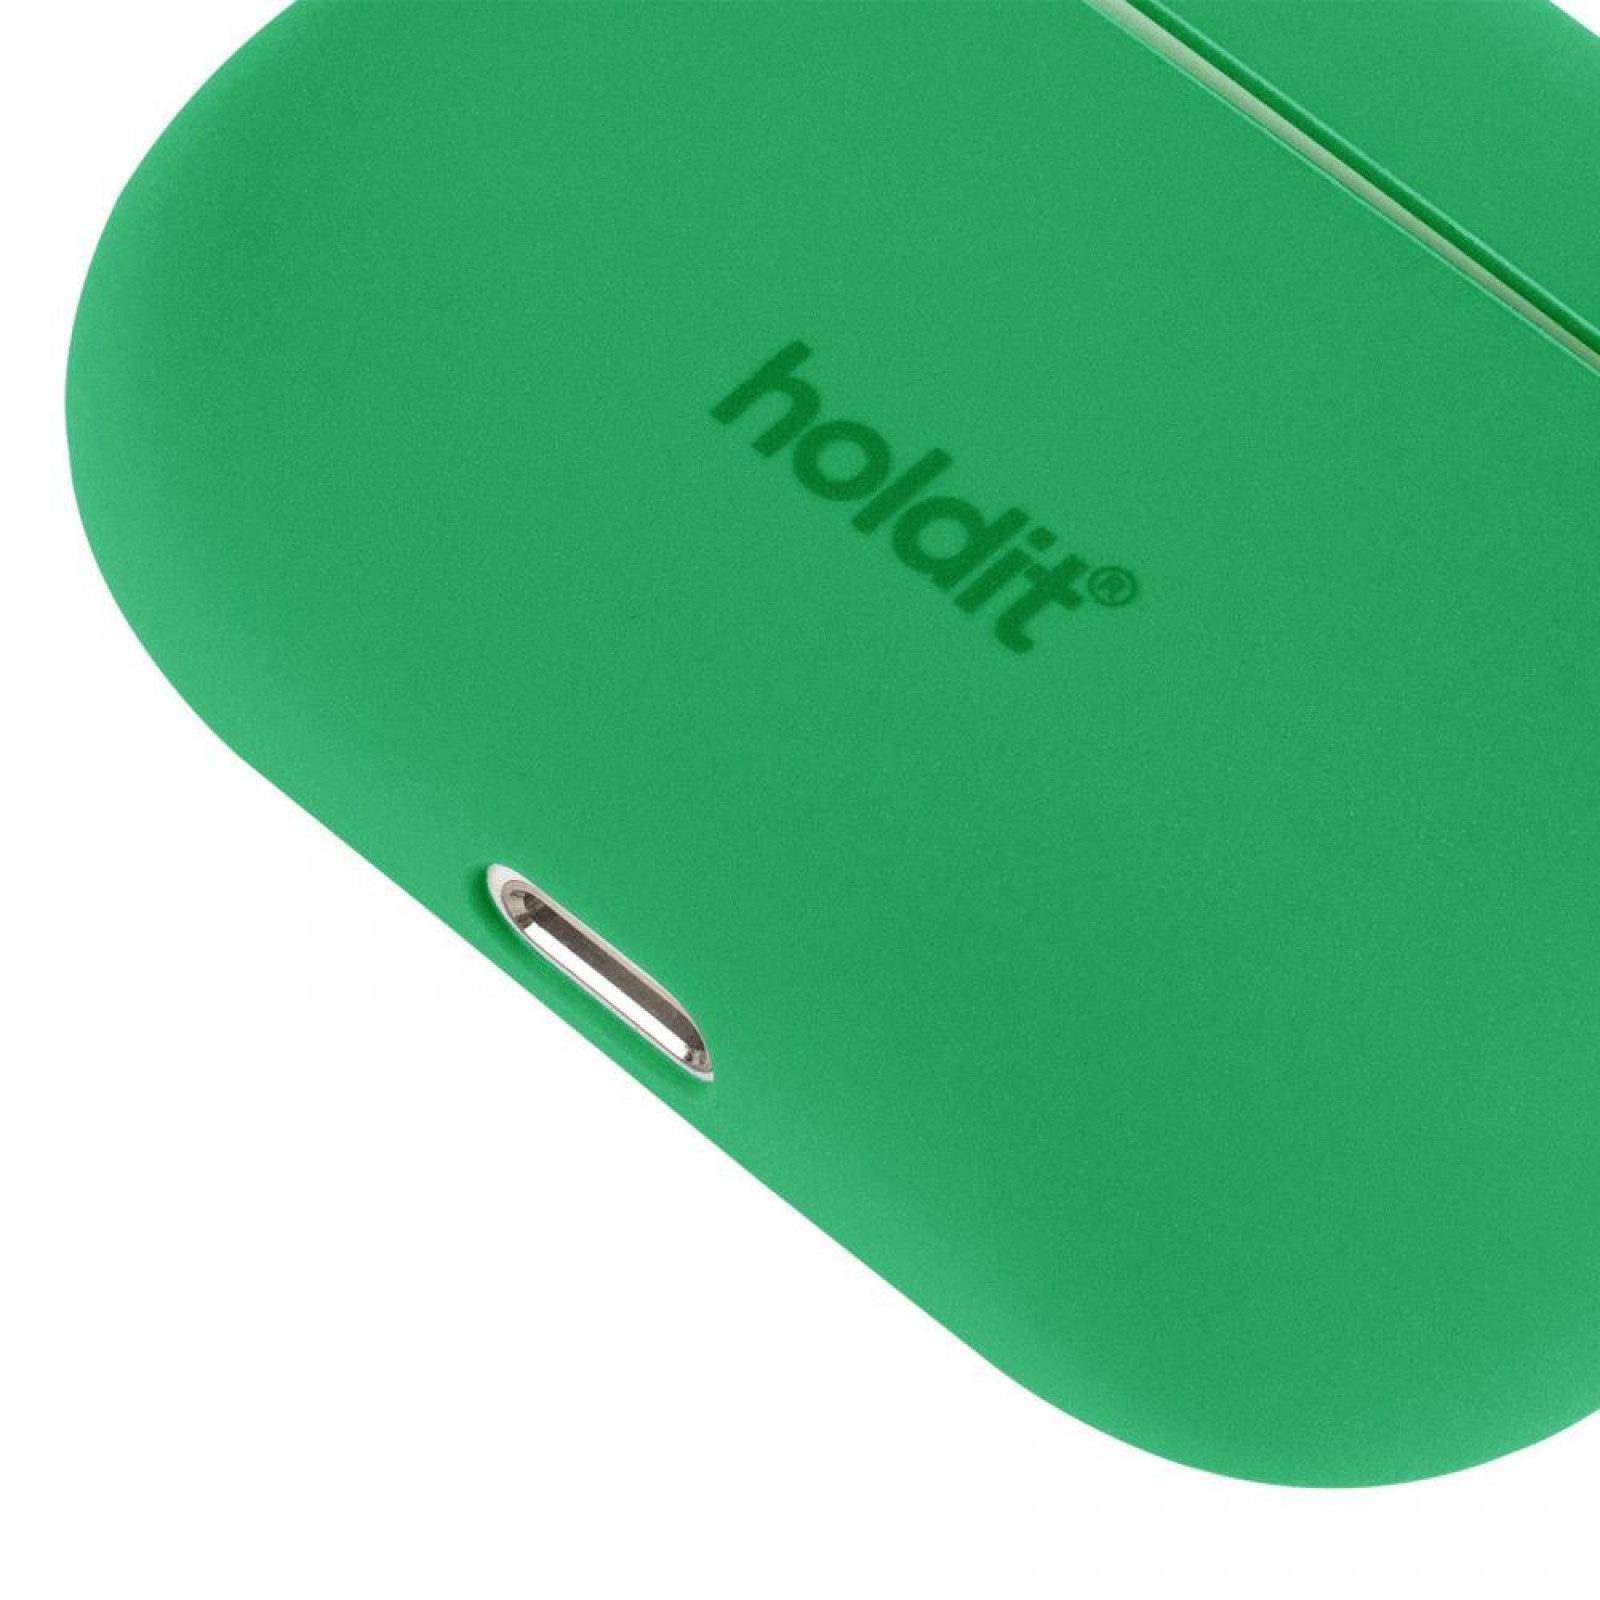 Калъф Holdit Silicone Case за  AirPods Pro 1/2  - Зелен